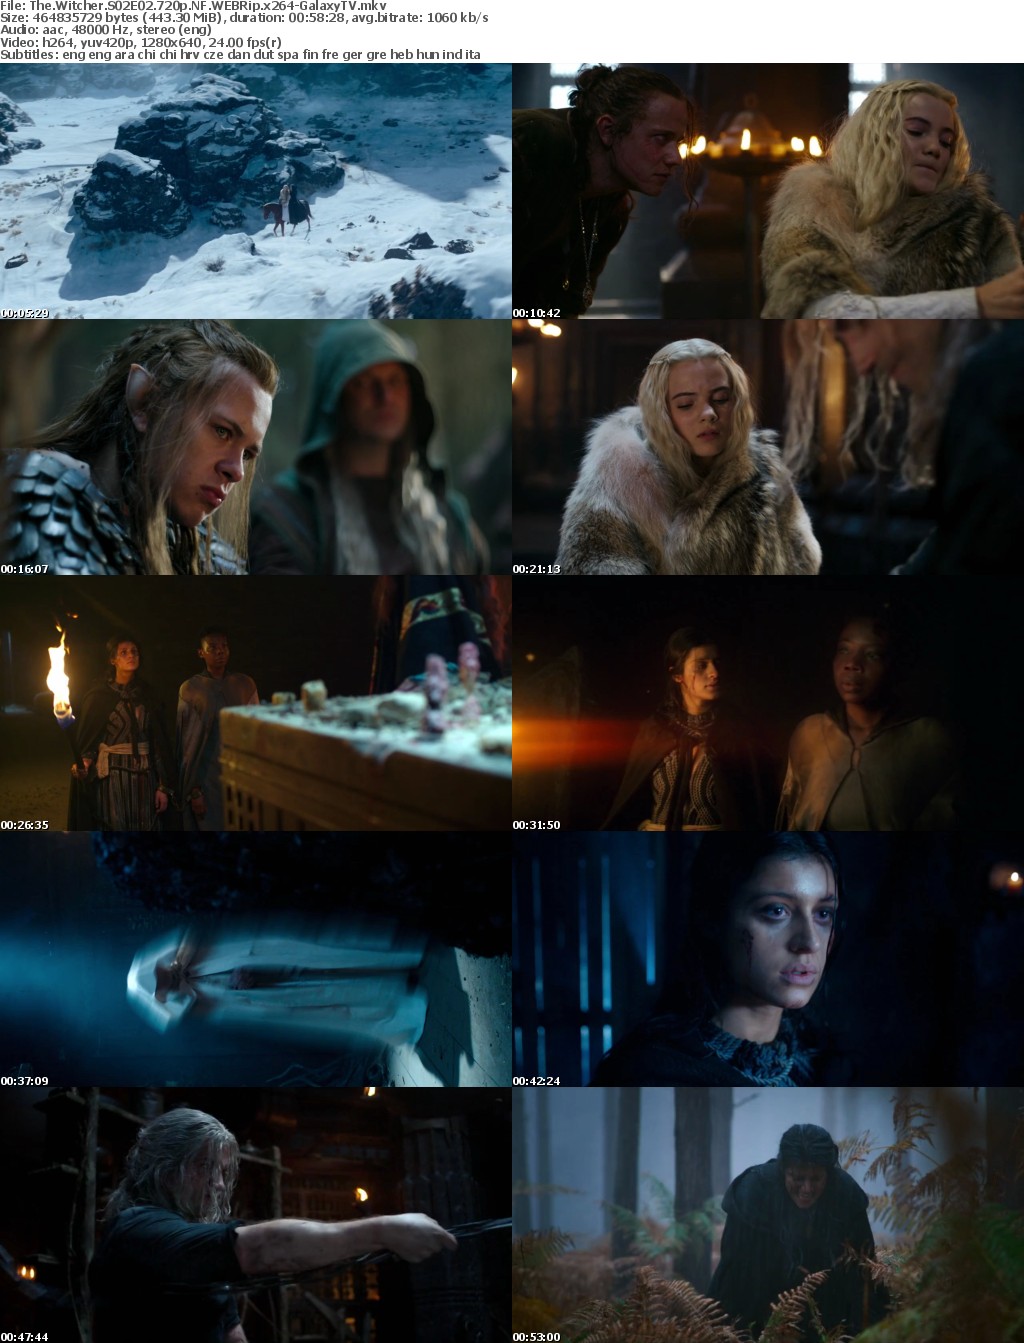 The Witcher S02 COMPLETE 720p NF WEBRip x264-GalaxyTV